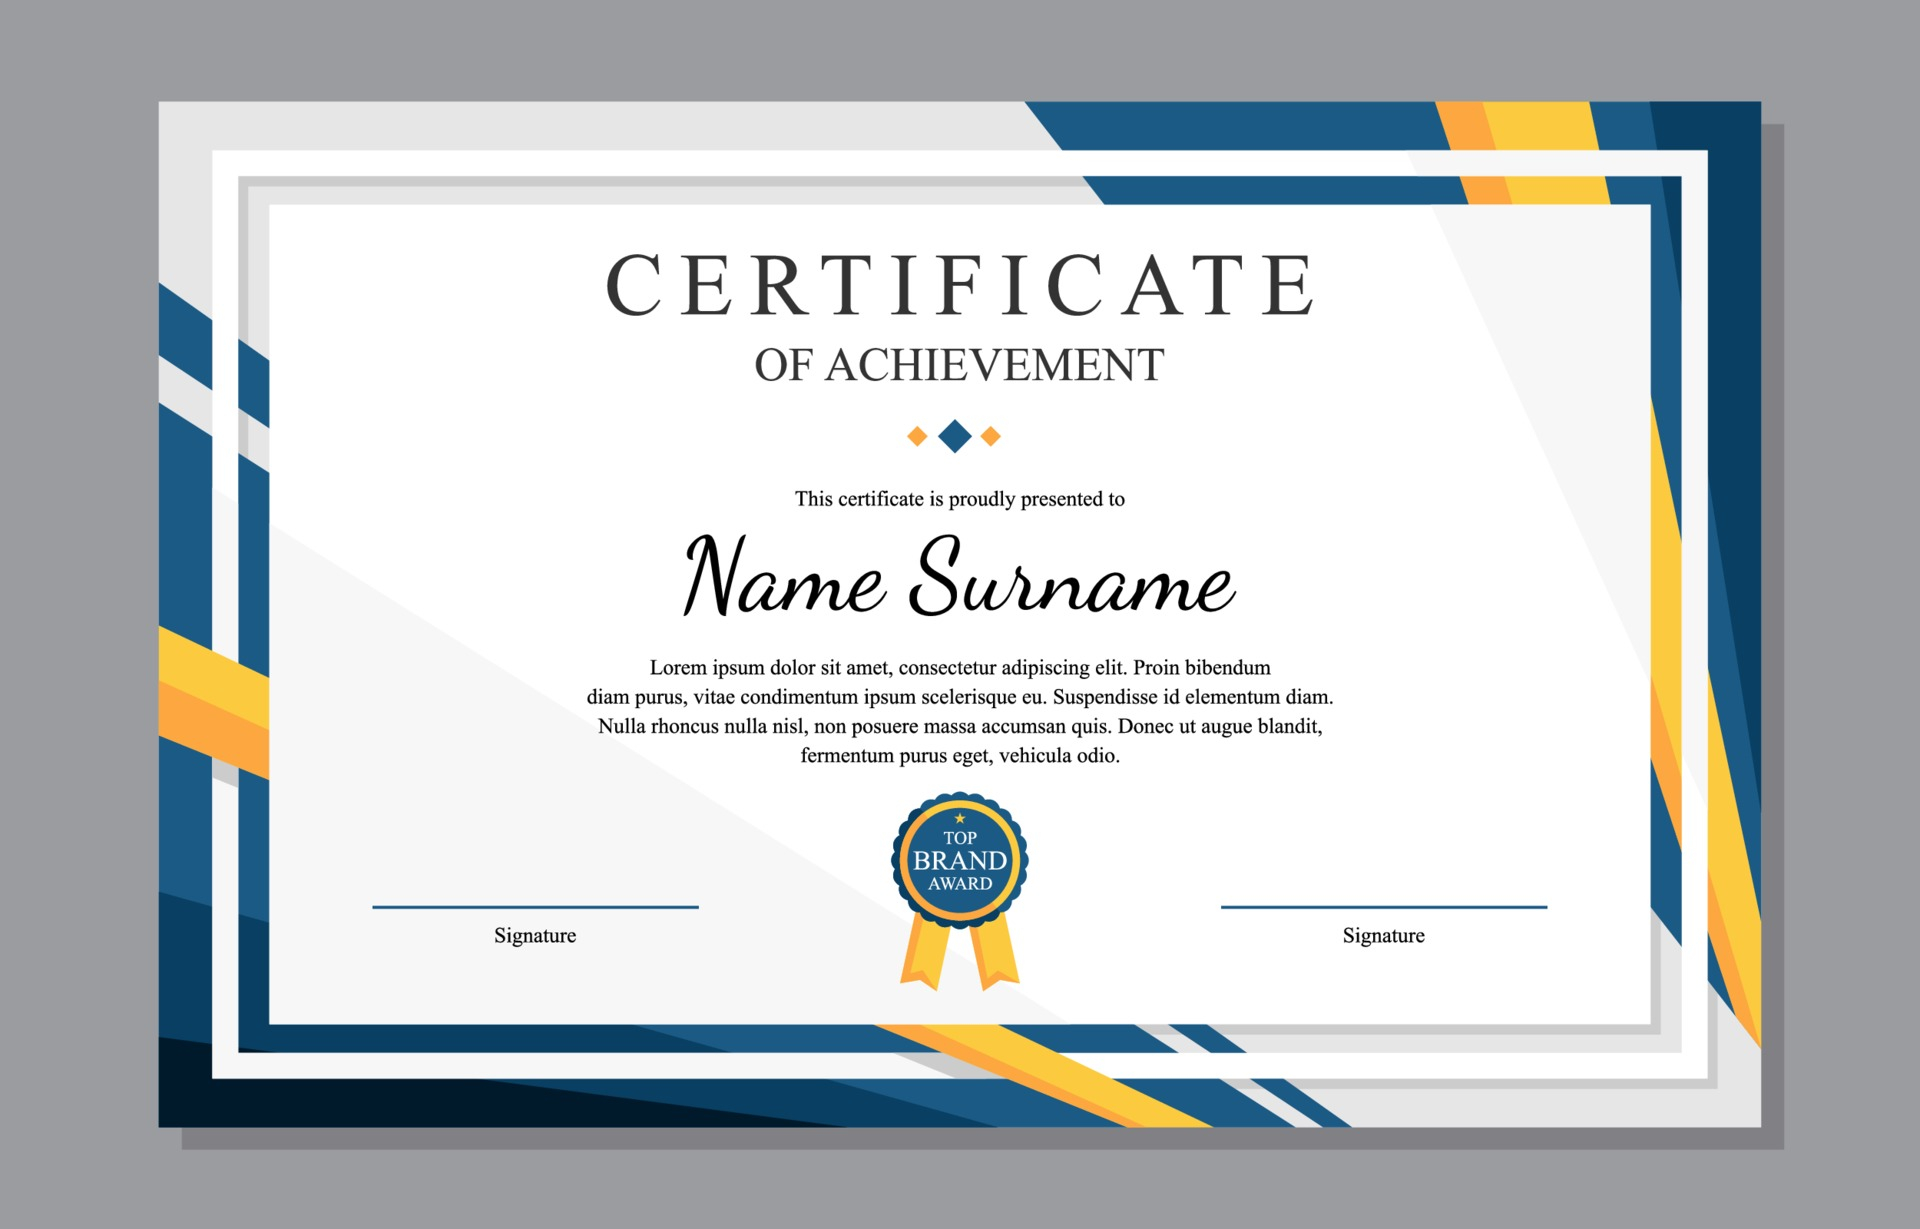 Certificate Templates, Free Certificate Designs For Promotion Certificate Template